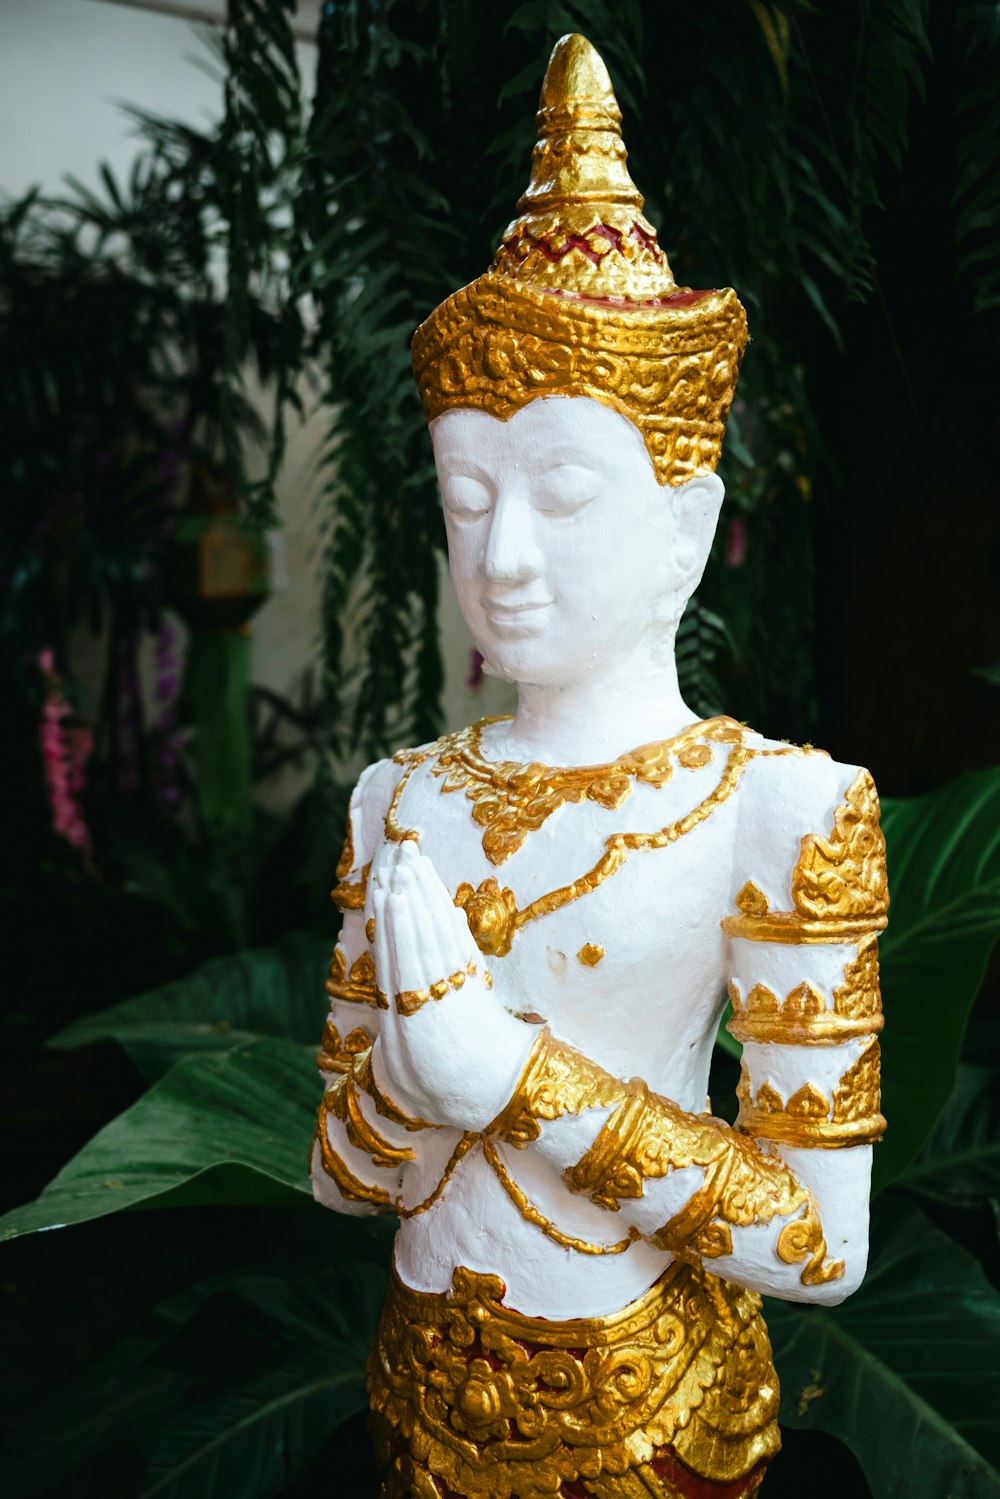 a statue of a person dressed in gold